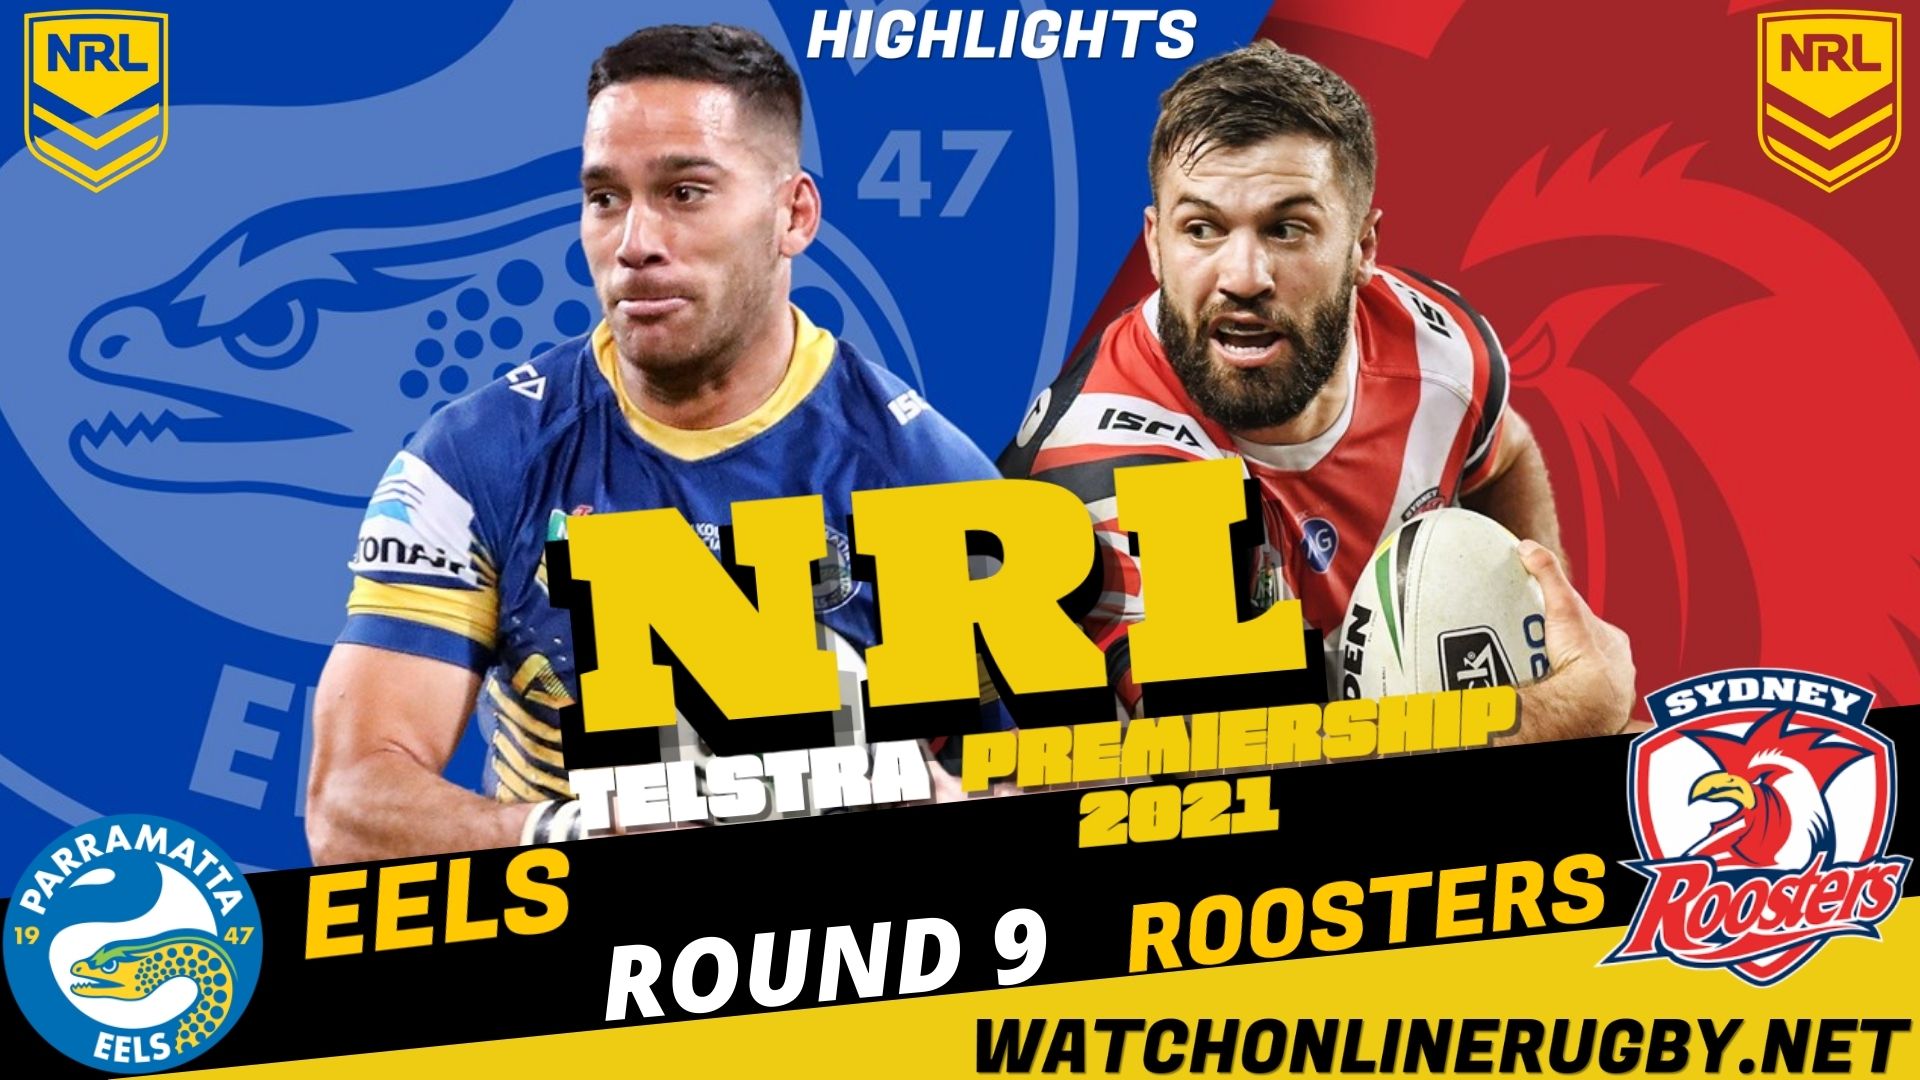 Eels Vs Roosters Highlights RD 9 NRL Rugby